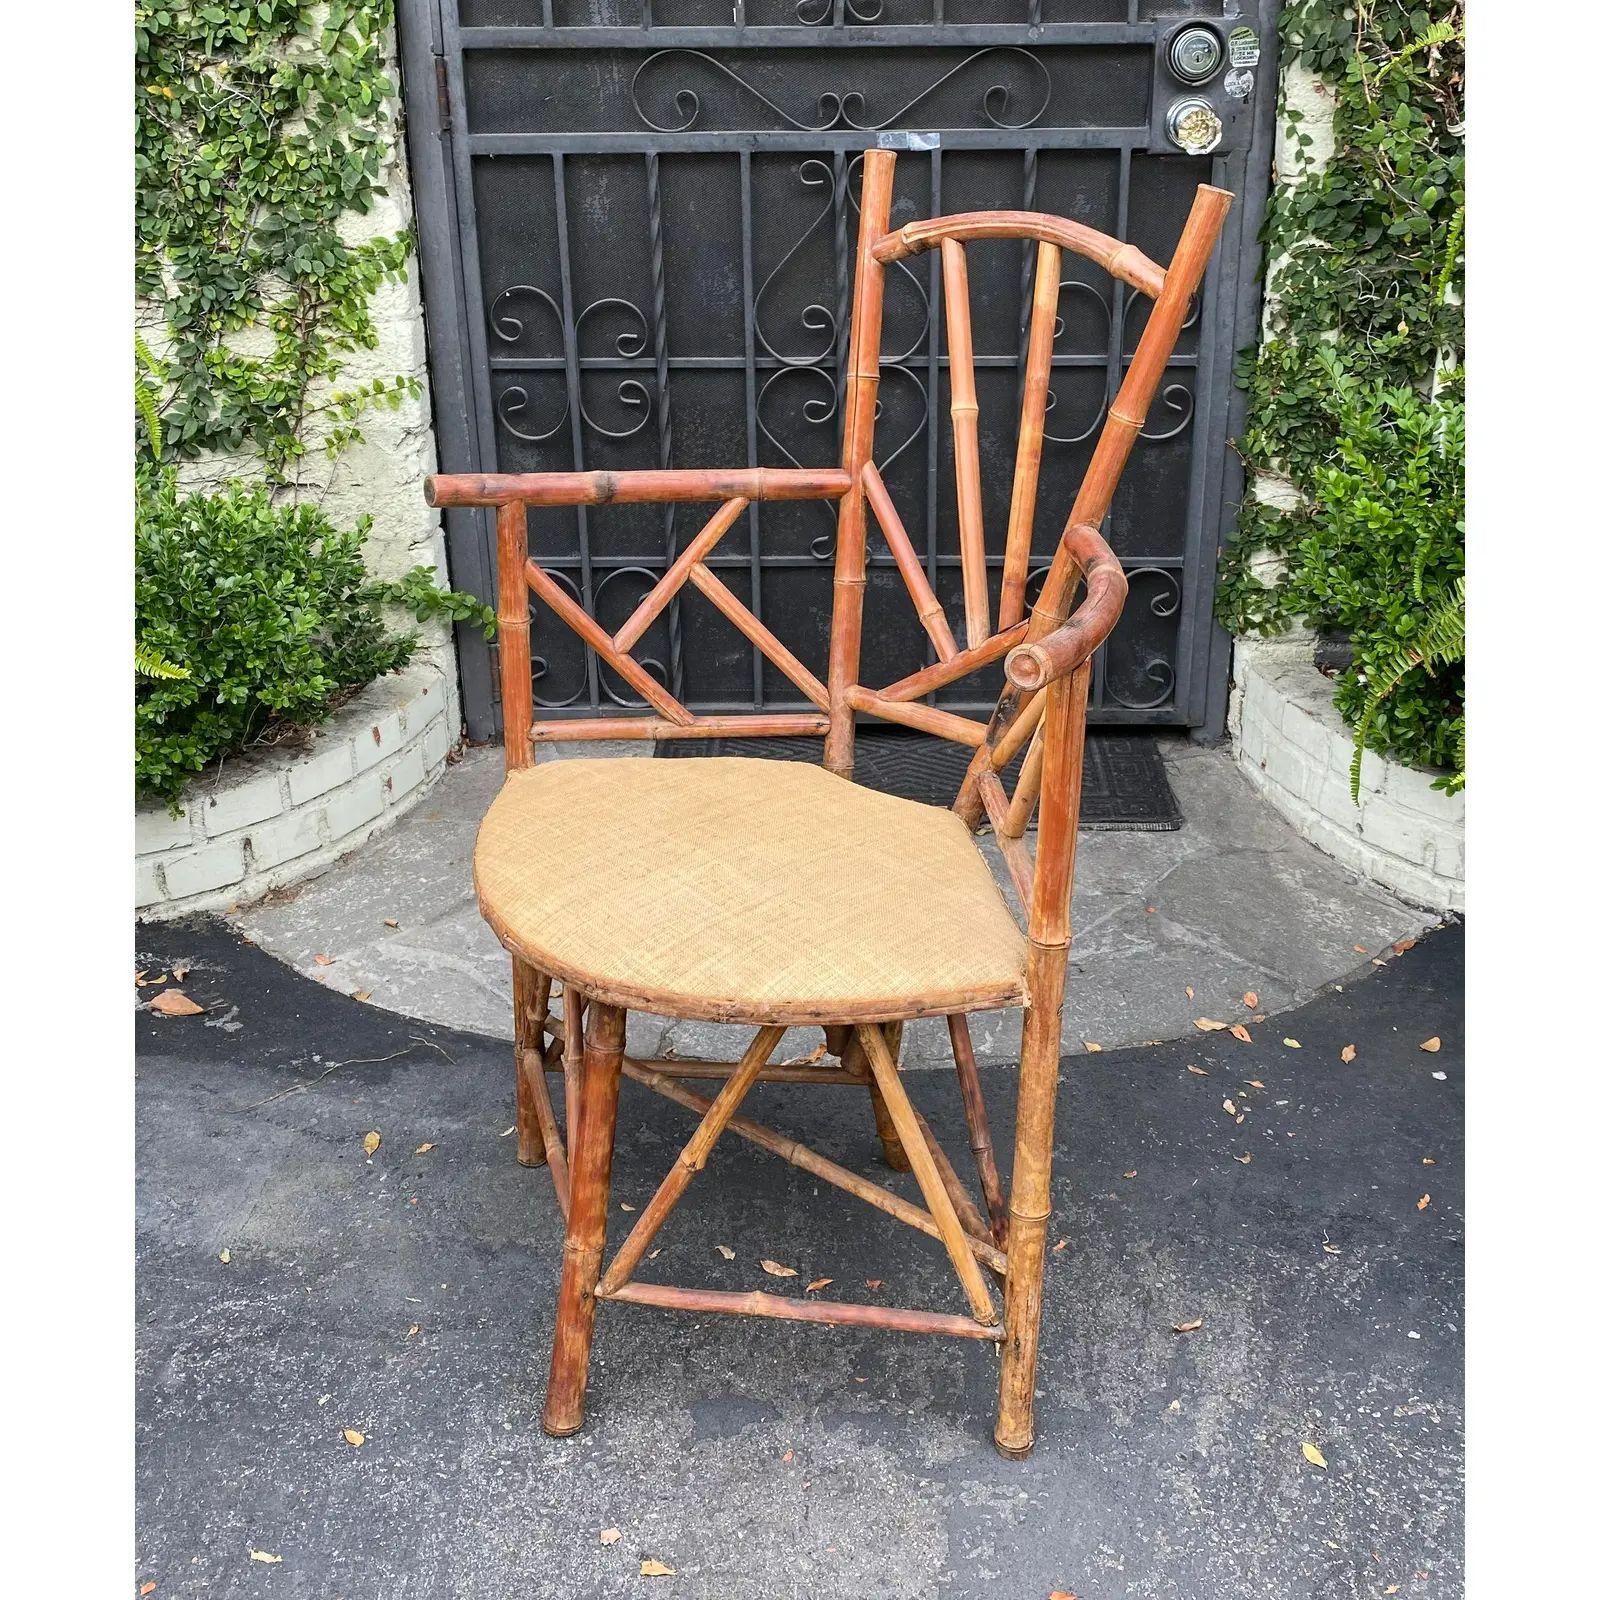 Rare antique 19th century bamboo corner chair. Superb quality and in excellent condition.

Additional information: 
Materials: Bamboo
Color: Brown
Period: 19th Century
Styles: Asian, English, French
Number of Seats: 1
Item Type: Vintage,